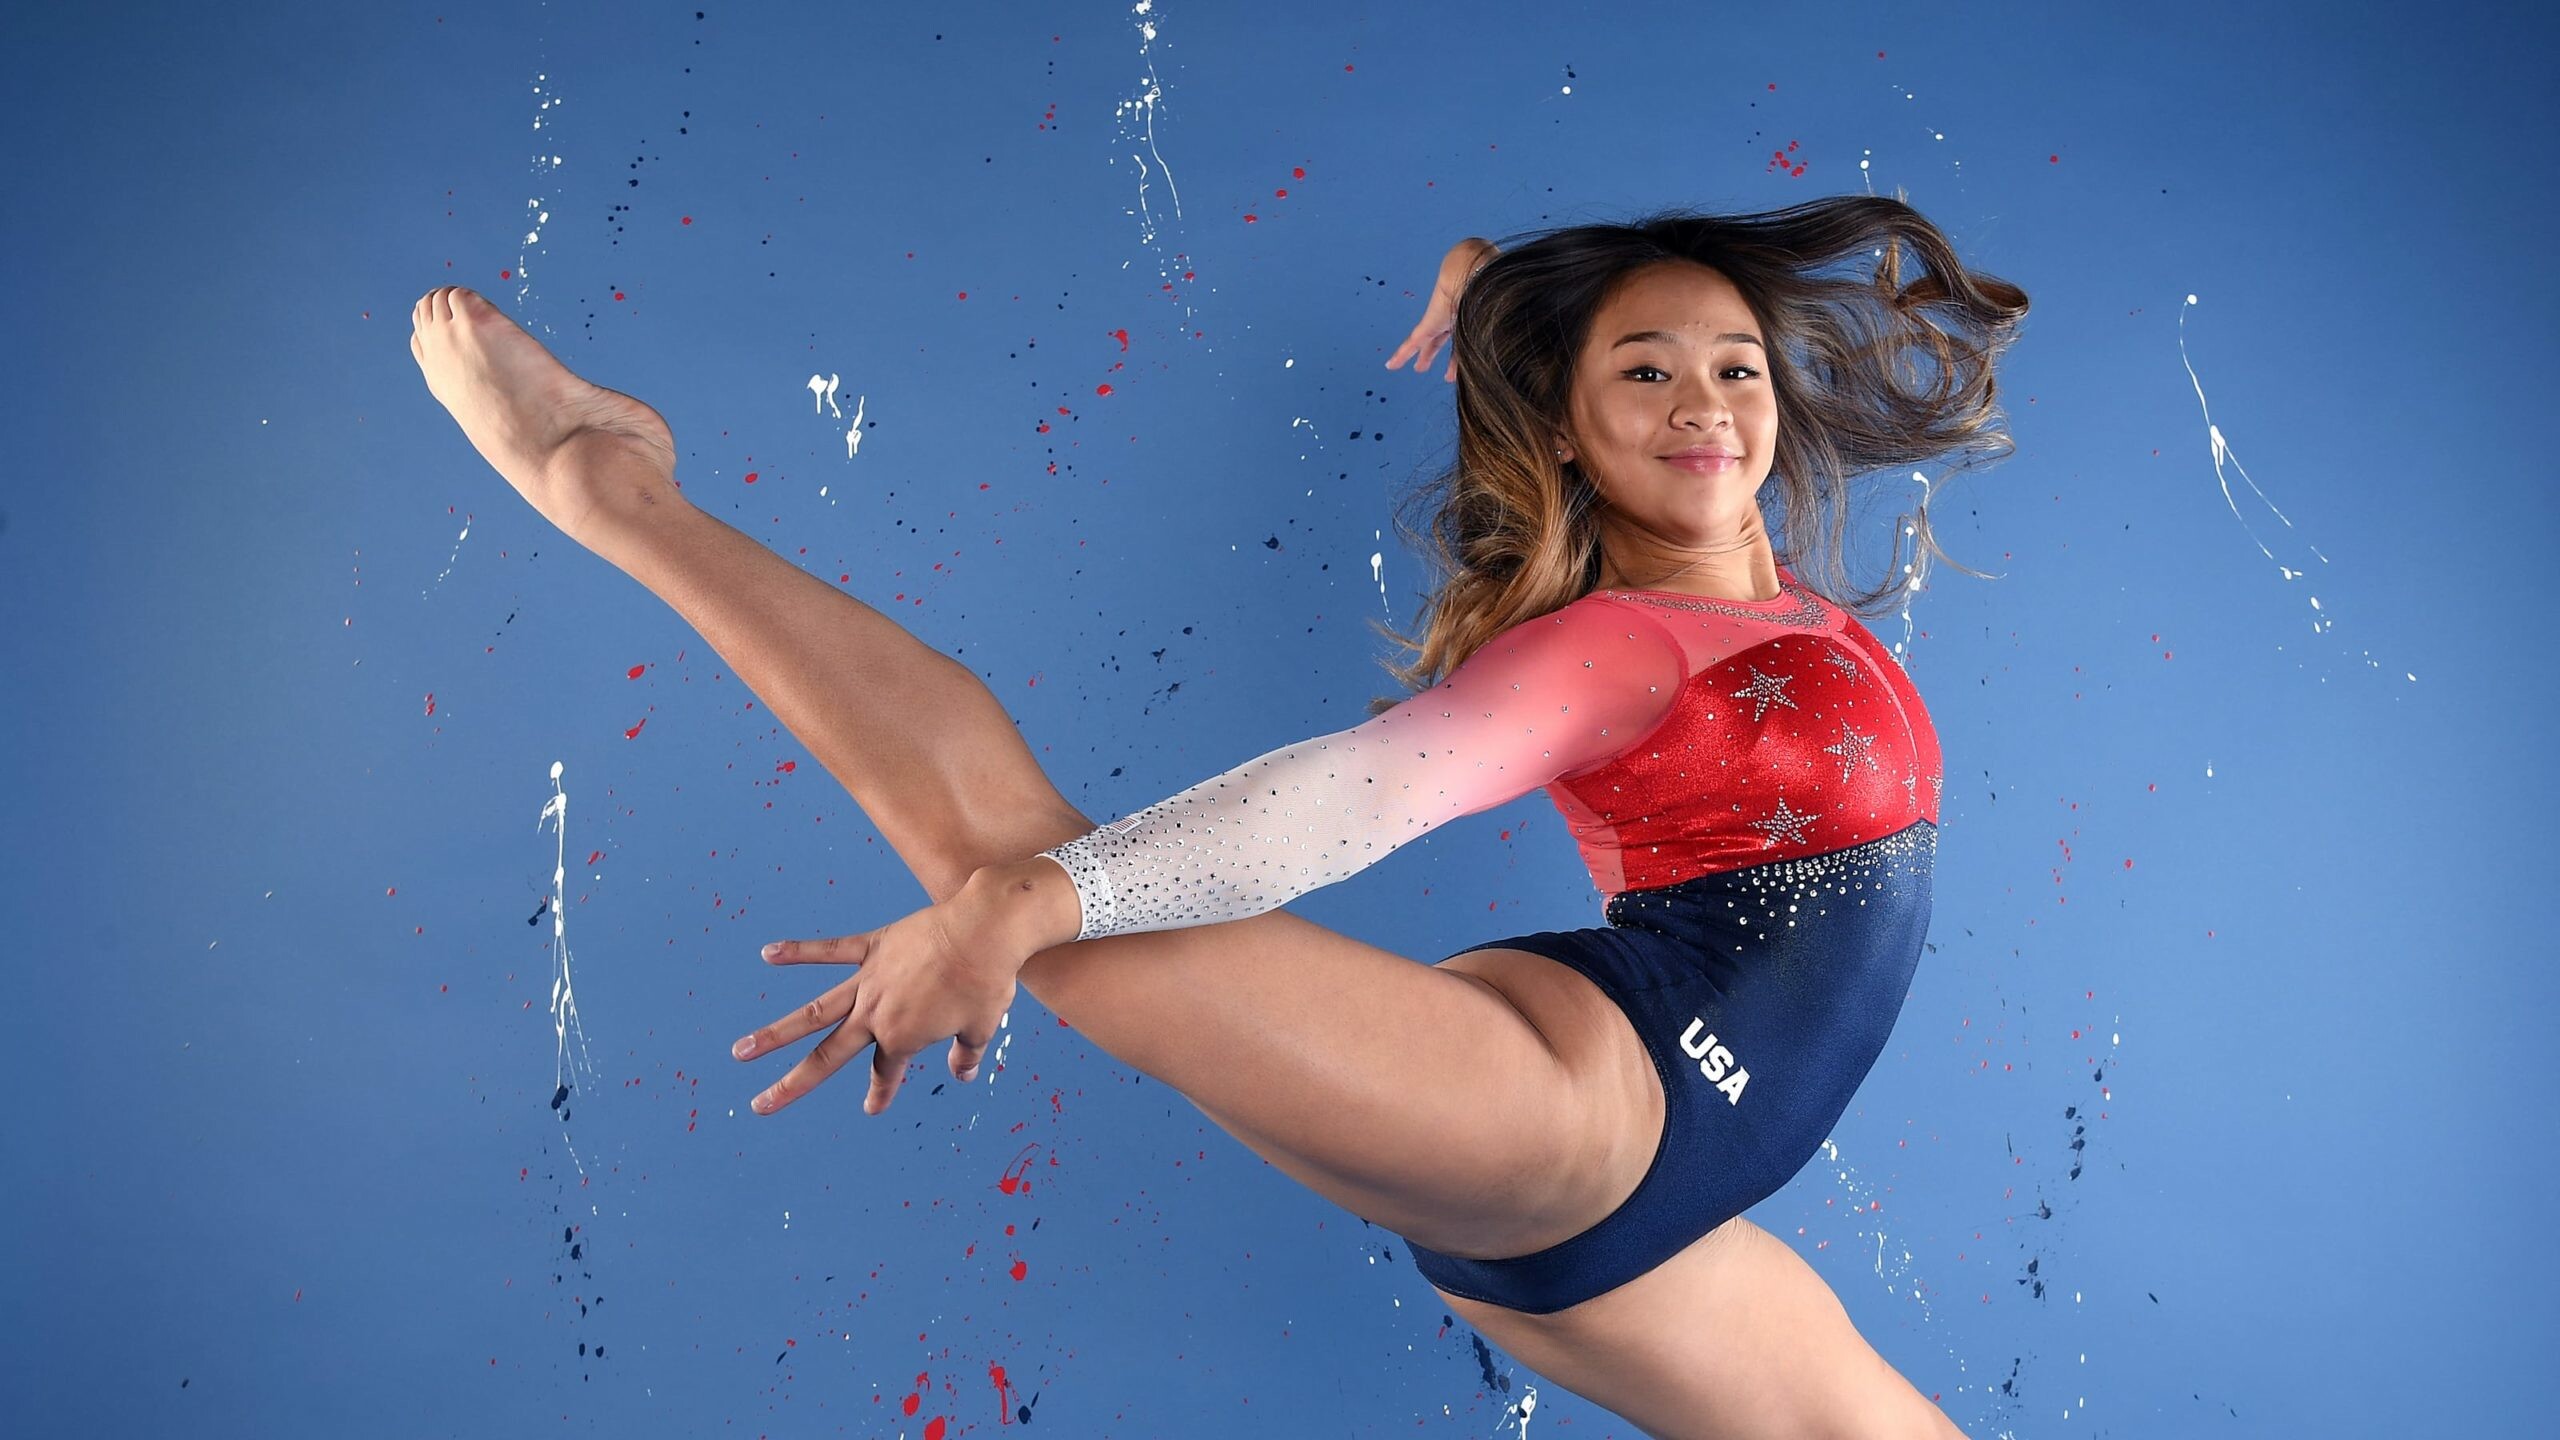 Sunisa Lee: She won the bronze medal in the all-around at the 2018 U.S. National Championships in Boston. 2560x1440 HD Wallpaper.